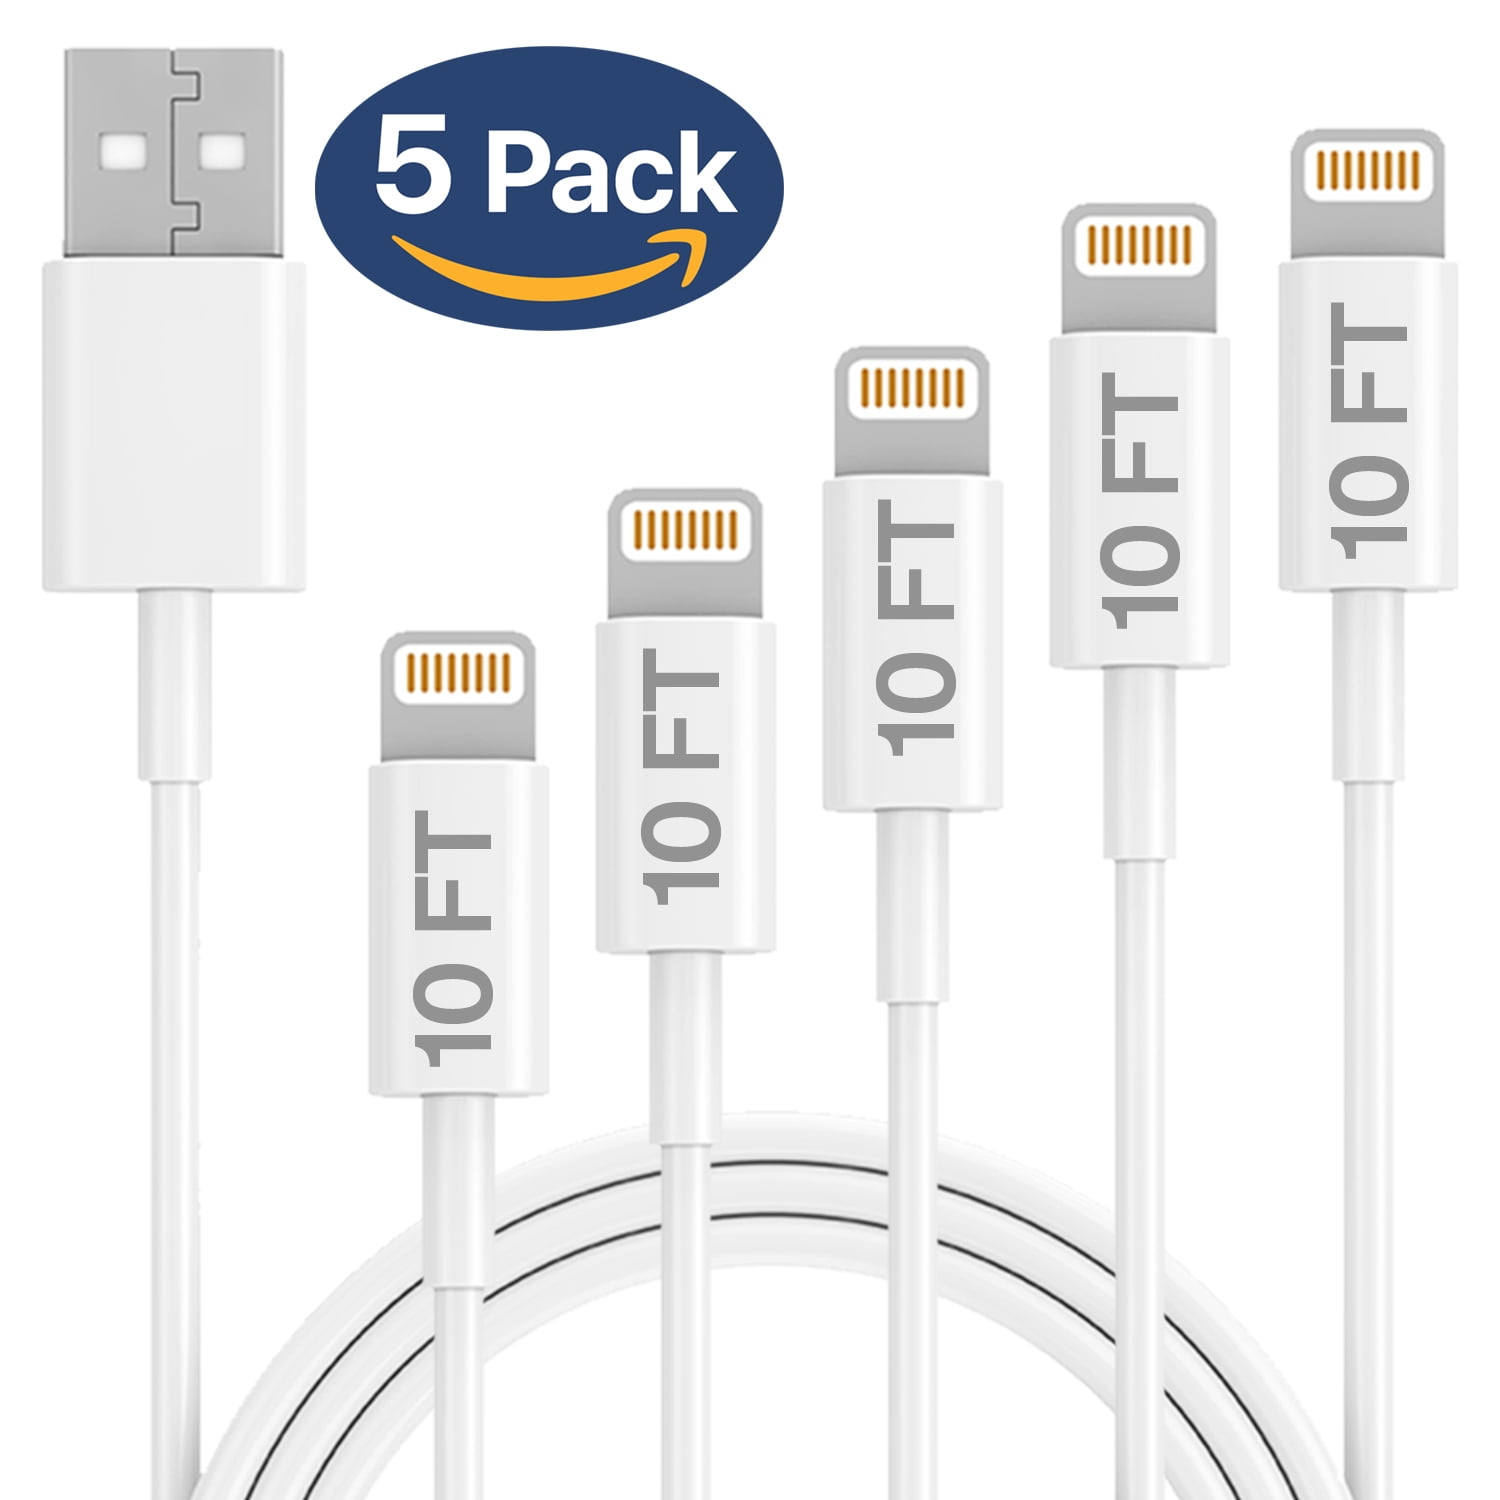 educate Melodious Veil Ixir Charger Lightning Cable, 5 Pack 10FT USB Cable, Compatible with iPhone  13, 12, 11, Xs, Xs Max, XR, X, 8, 8 Plus, 7, 7 Plus, 6S, 6S Plus,iPad Air,  Mini, iPod